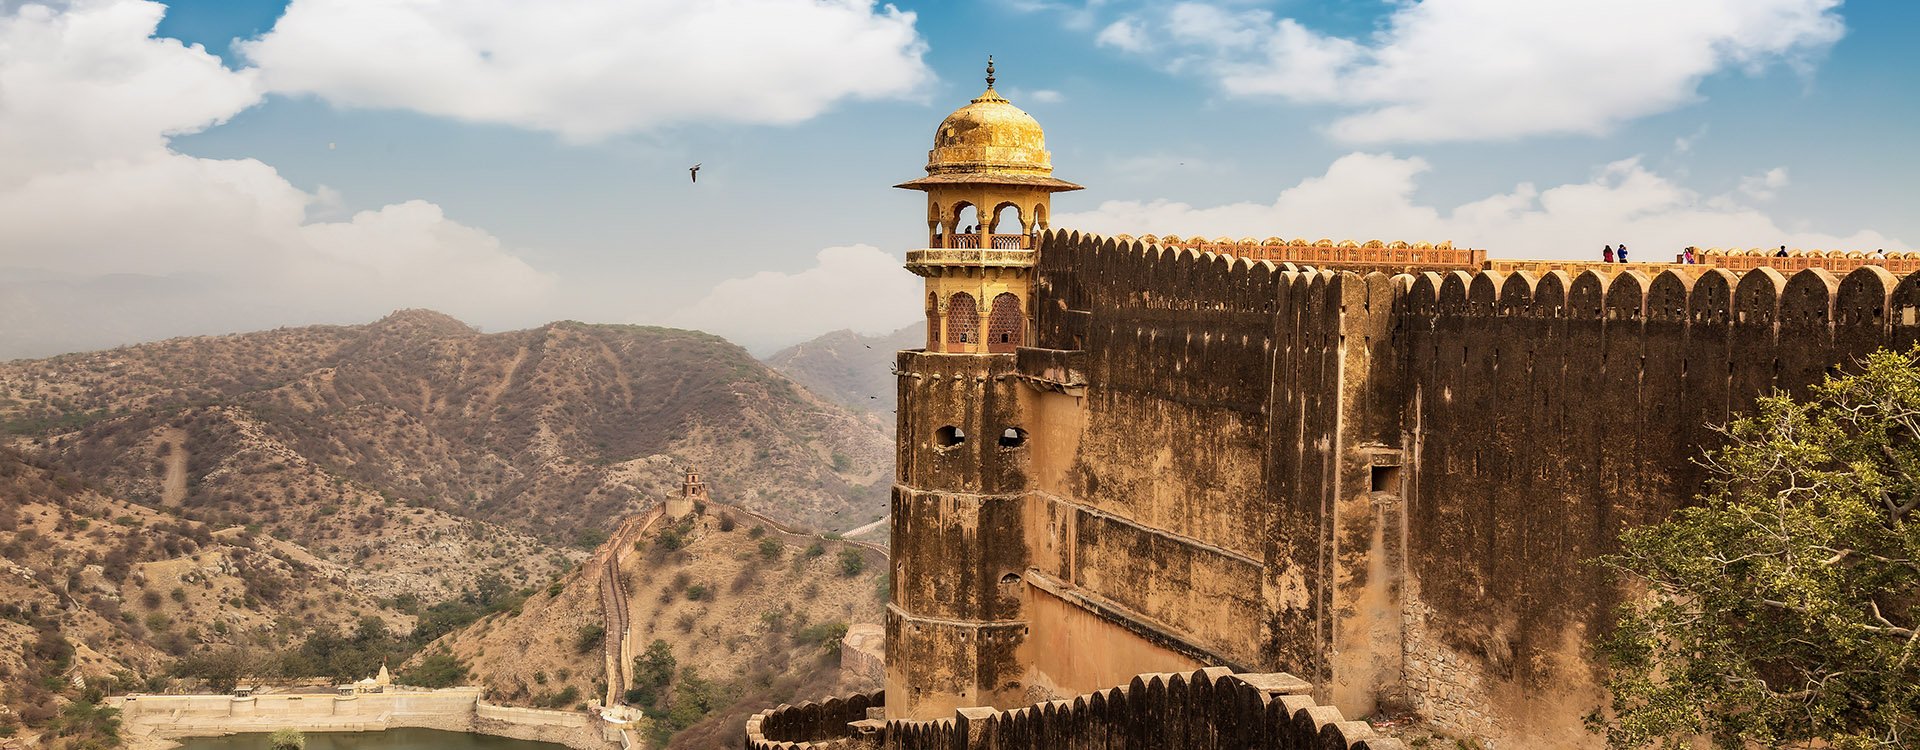 Jaigarh Fort Rajasthan with view of Jaipur city scape and Maota lake